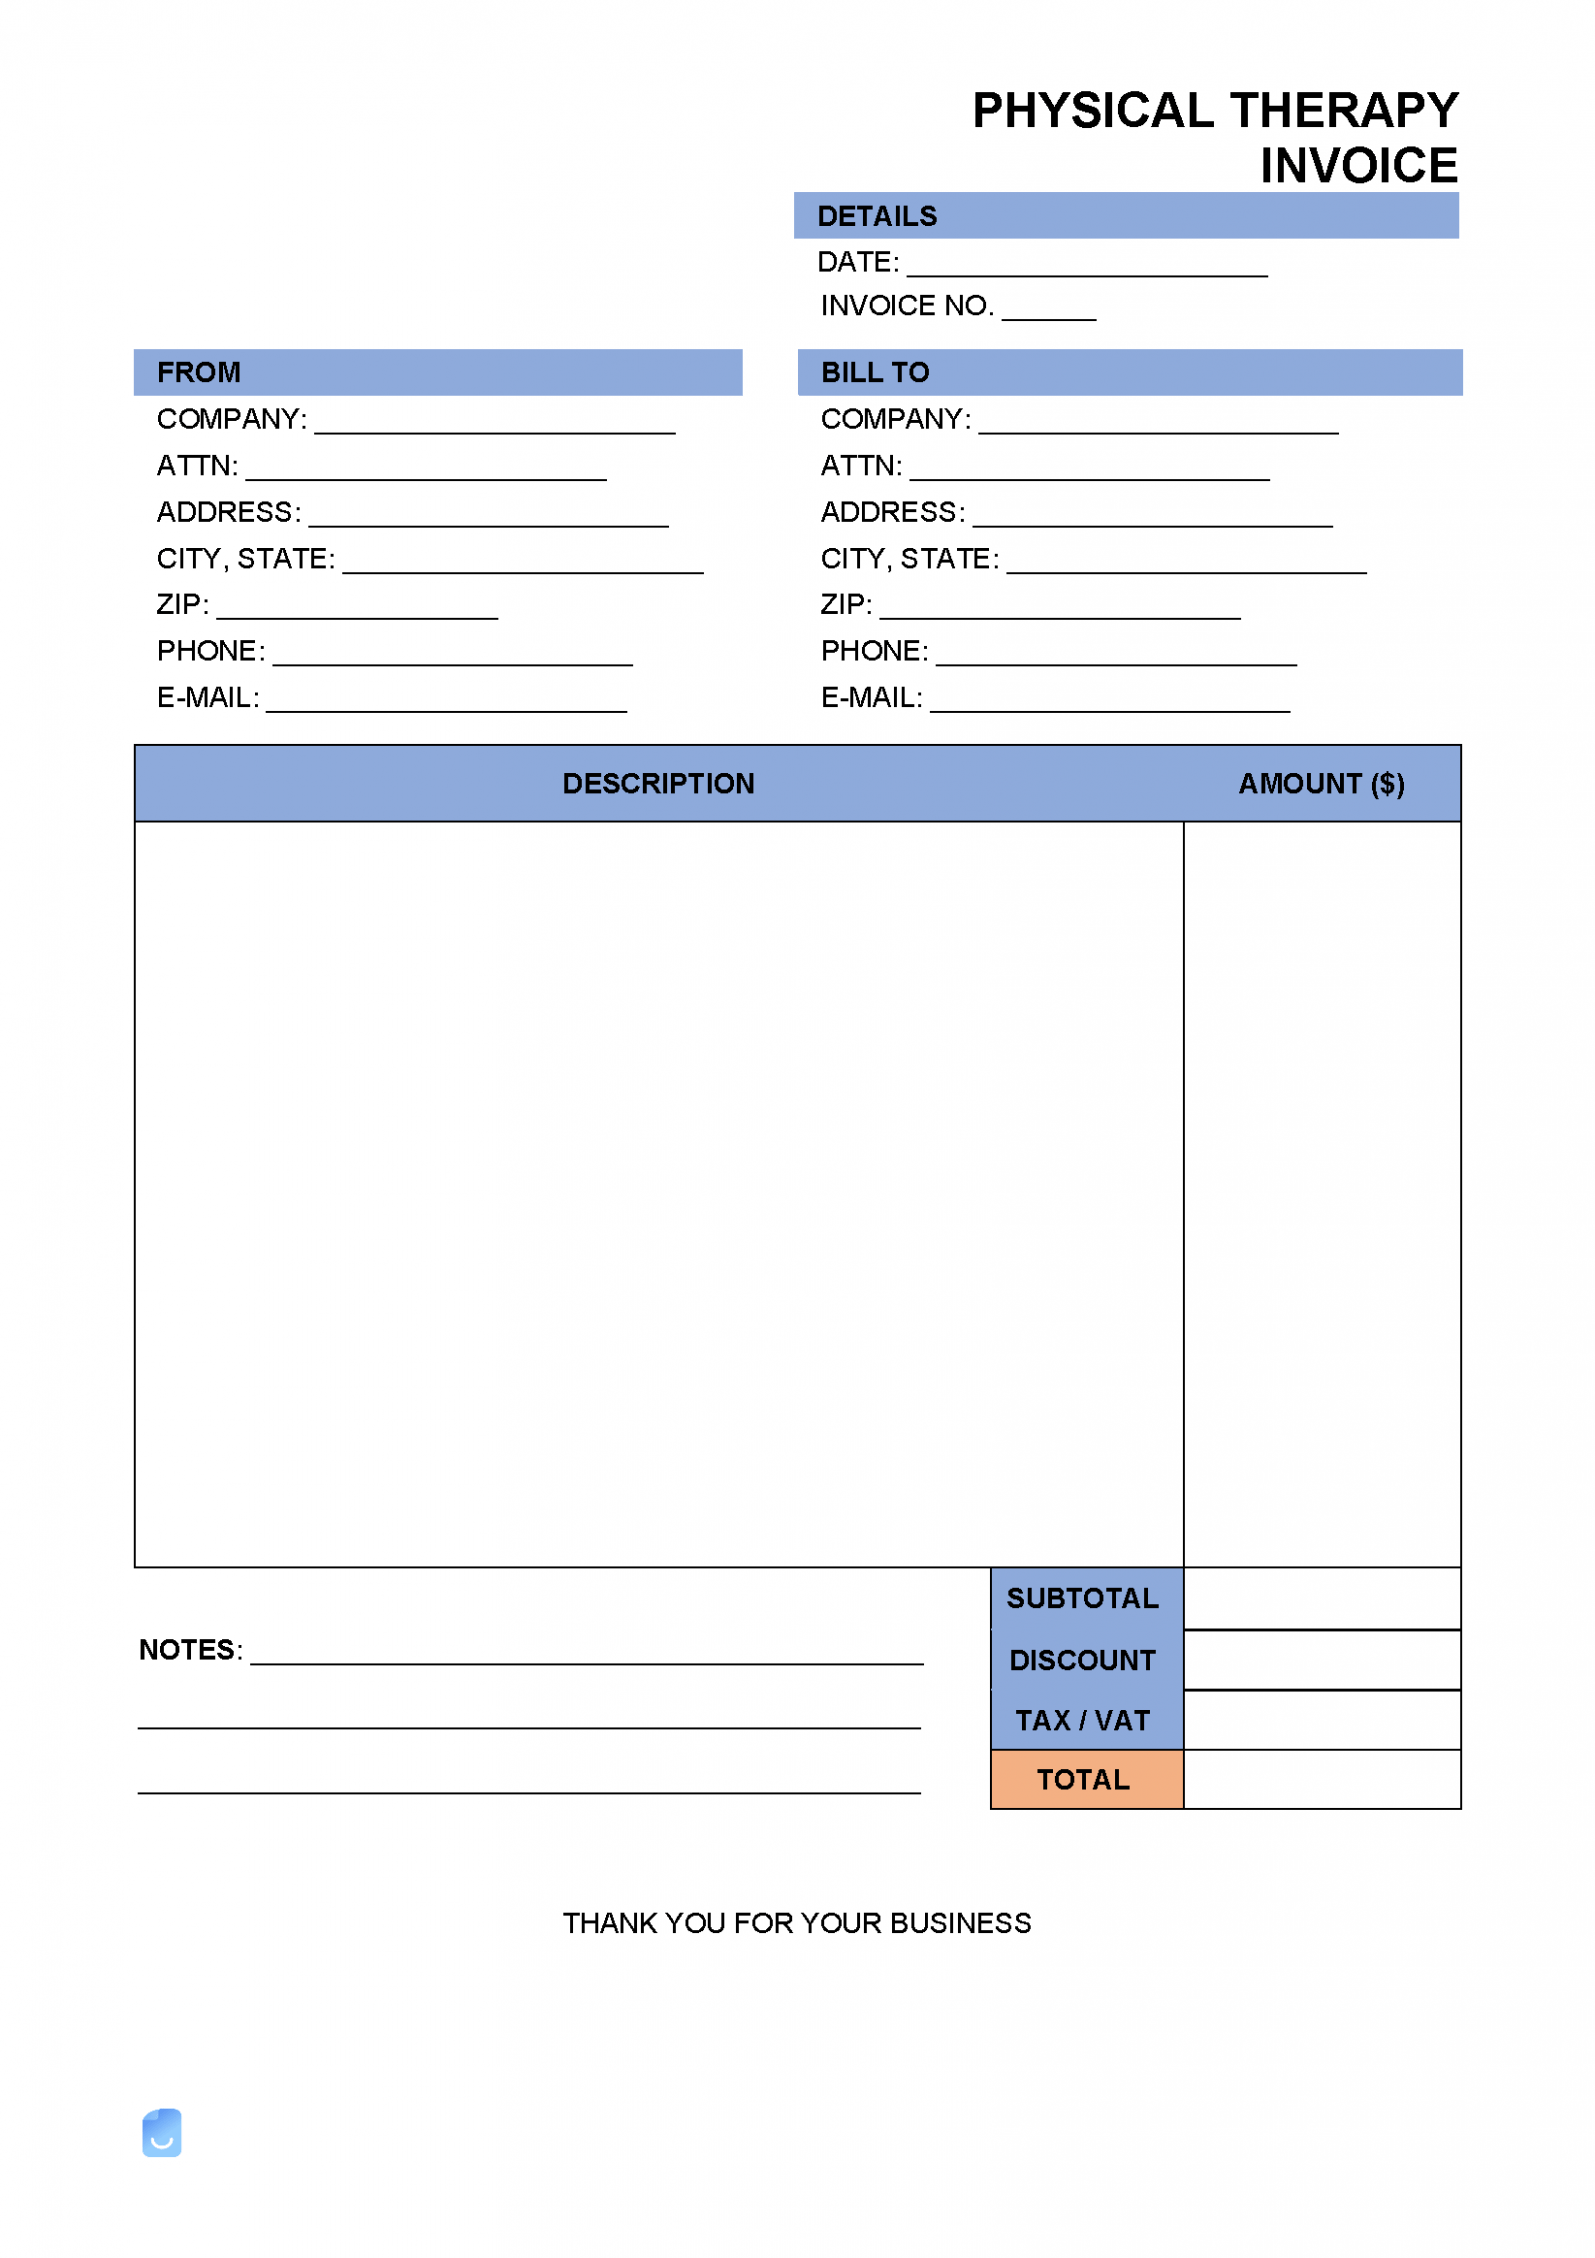 Sample Physiotherapy Invoice Template PPT